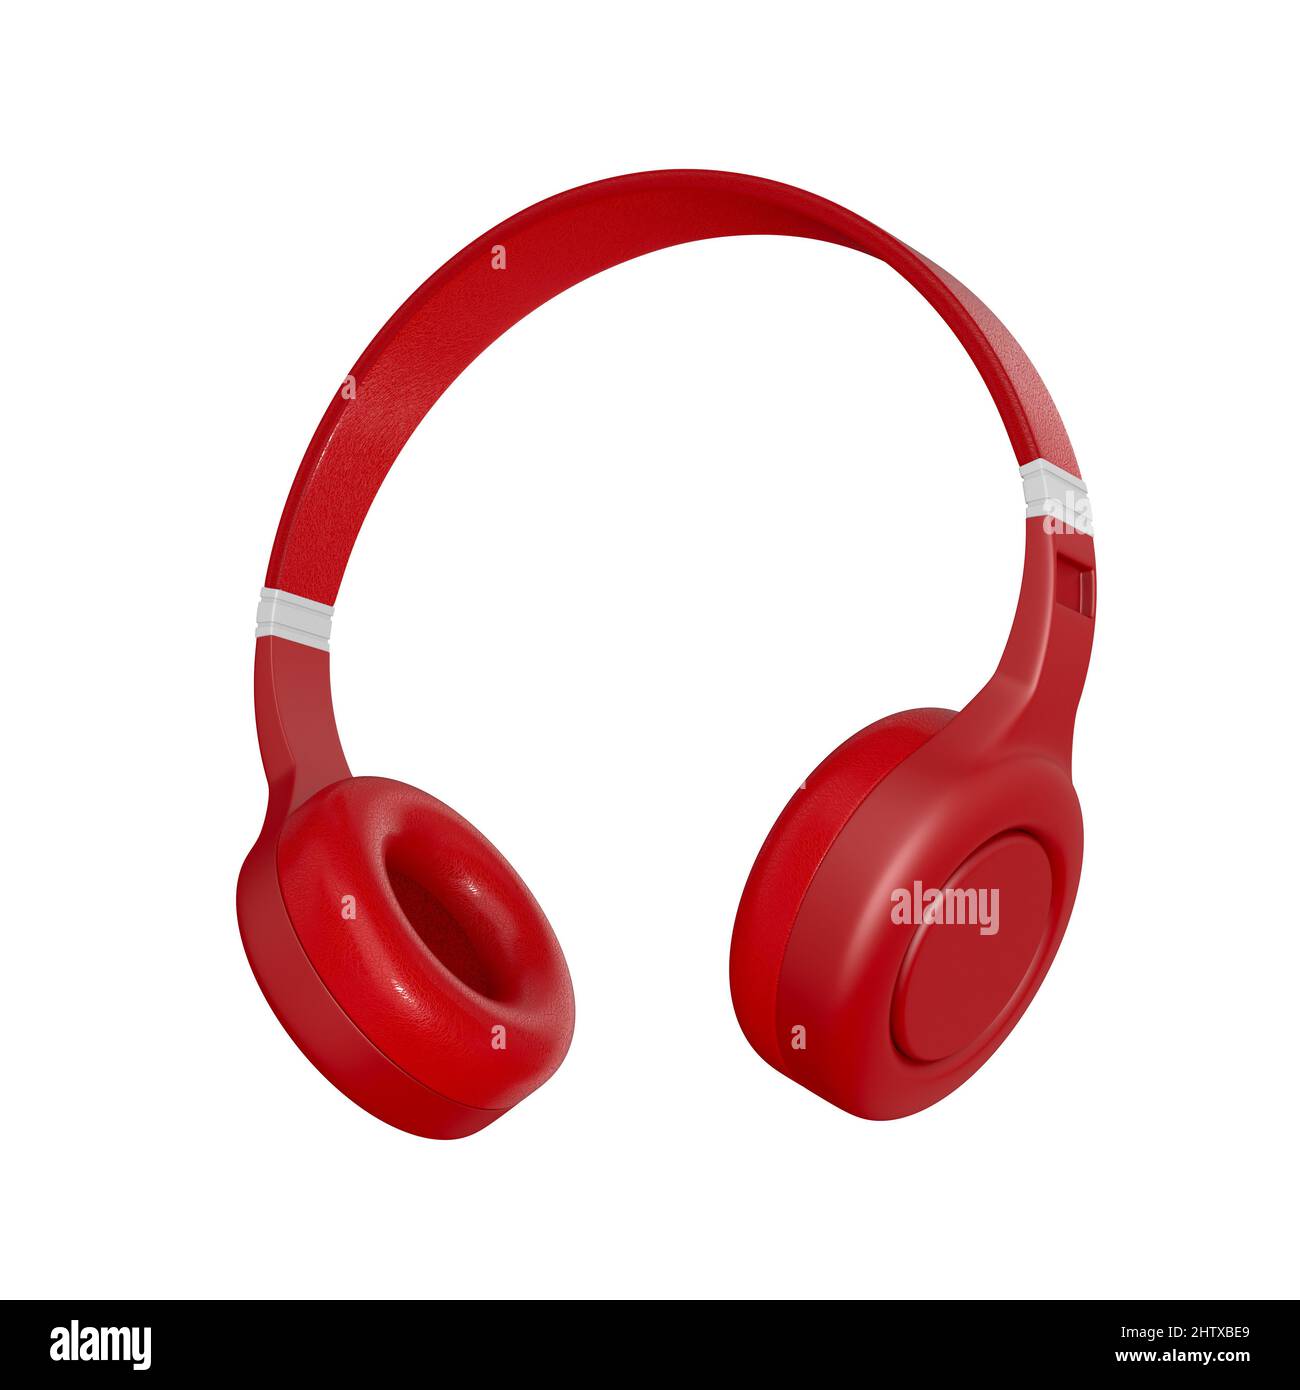 Red headphone on white background. Isolated 3D illustration Stock Photo